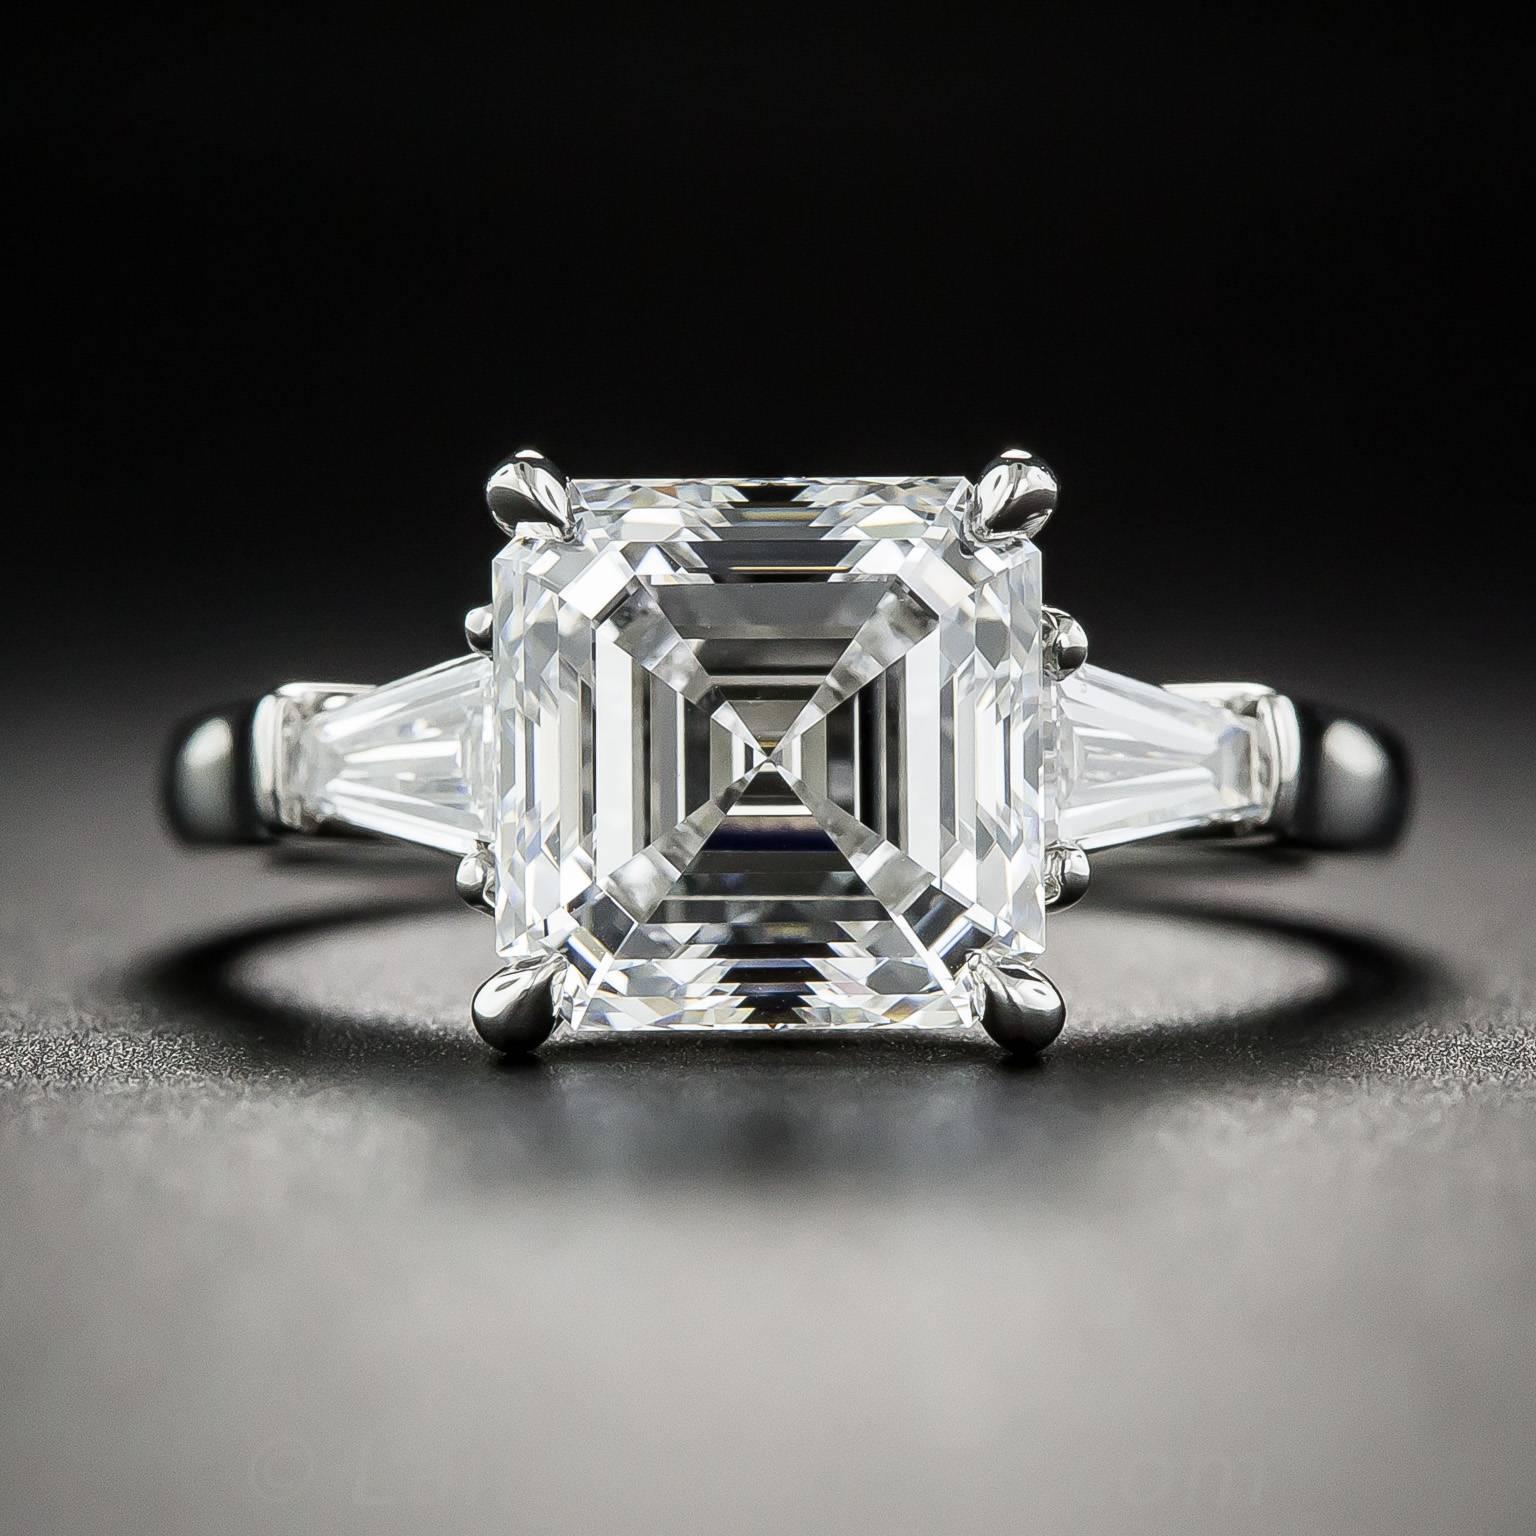 Impressive in both quality and scale, this hand fabricated platinum engagement ring features an ice-white square emerald-cut (aka Asscher-cut) diamond, accompanied with a GIA grading report indicating E color and VS2 clarity. The spectacular diamond